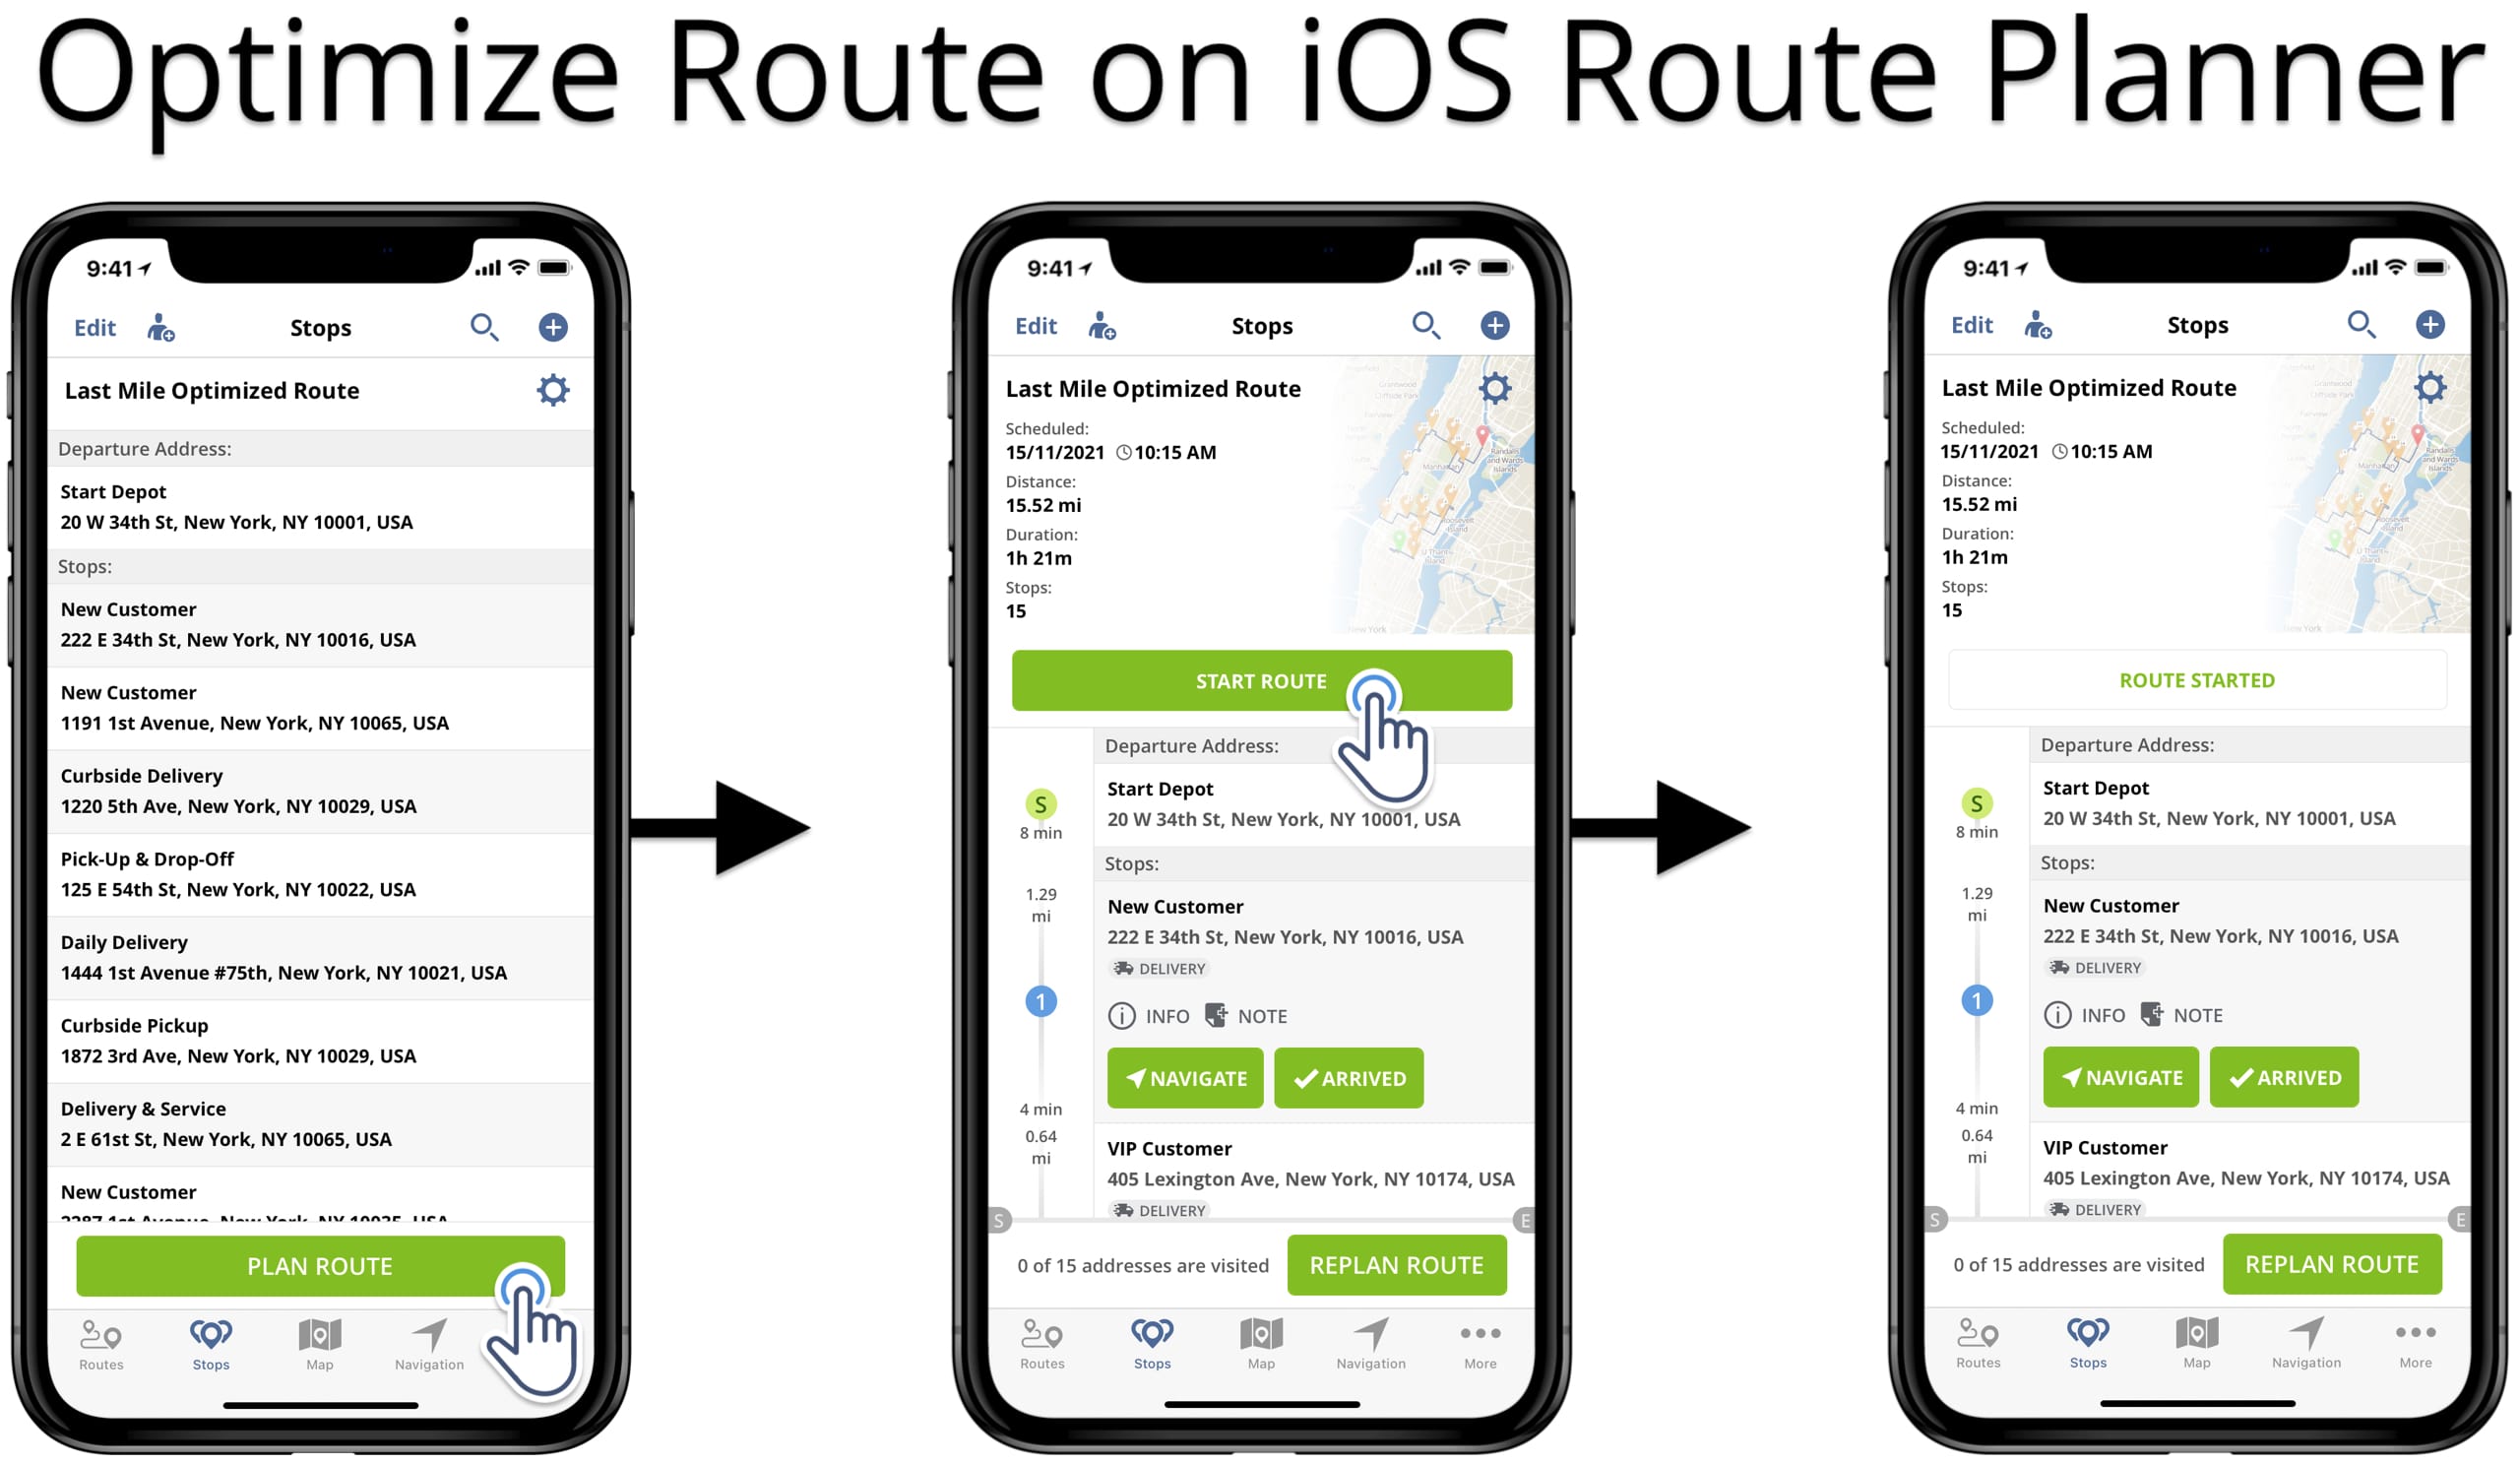 Optimizing route on the iOS Route Planner app to map multiple locations.